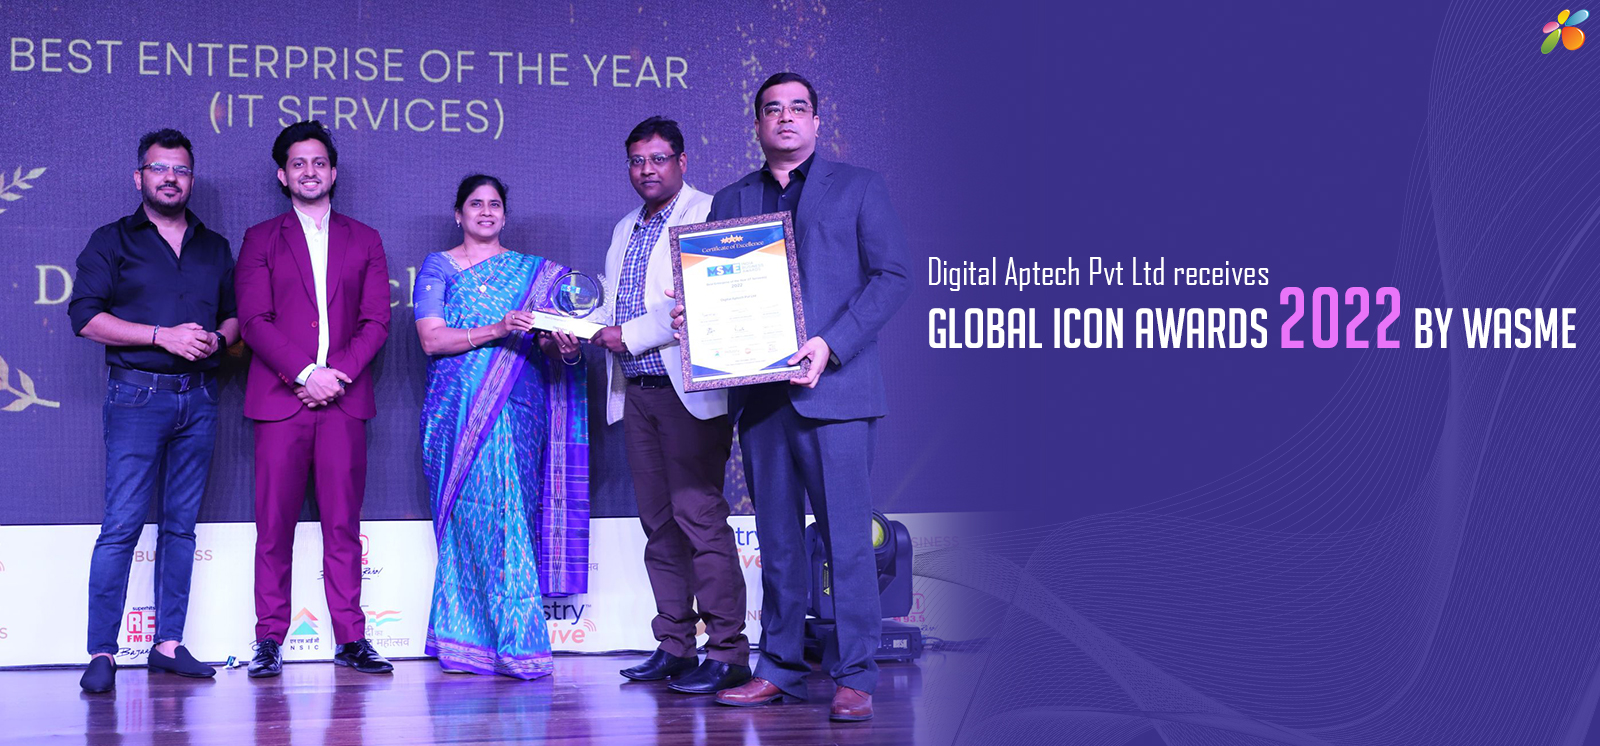 Digital Aptech Pvt Ltd receives Global Icon Awards 2022 by WASME